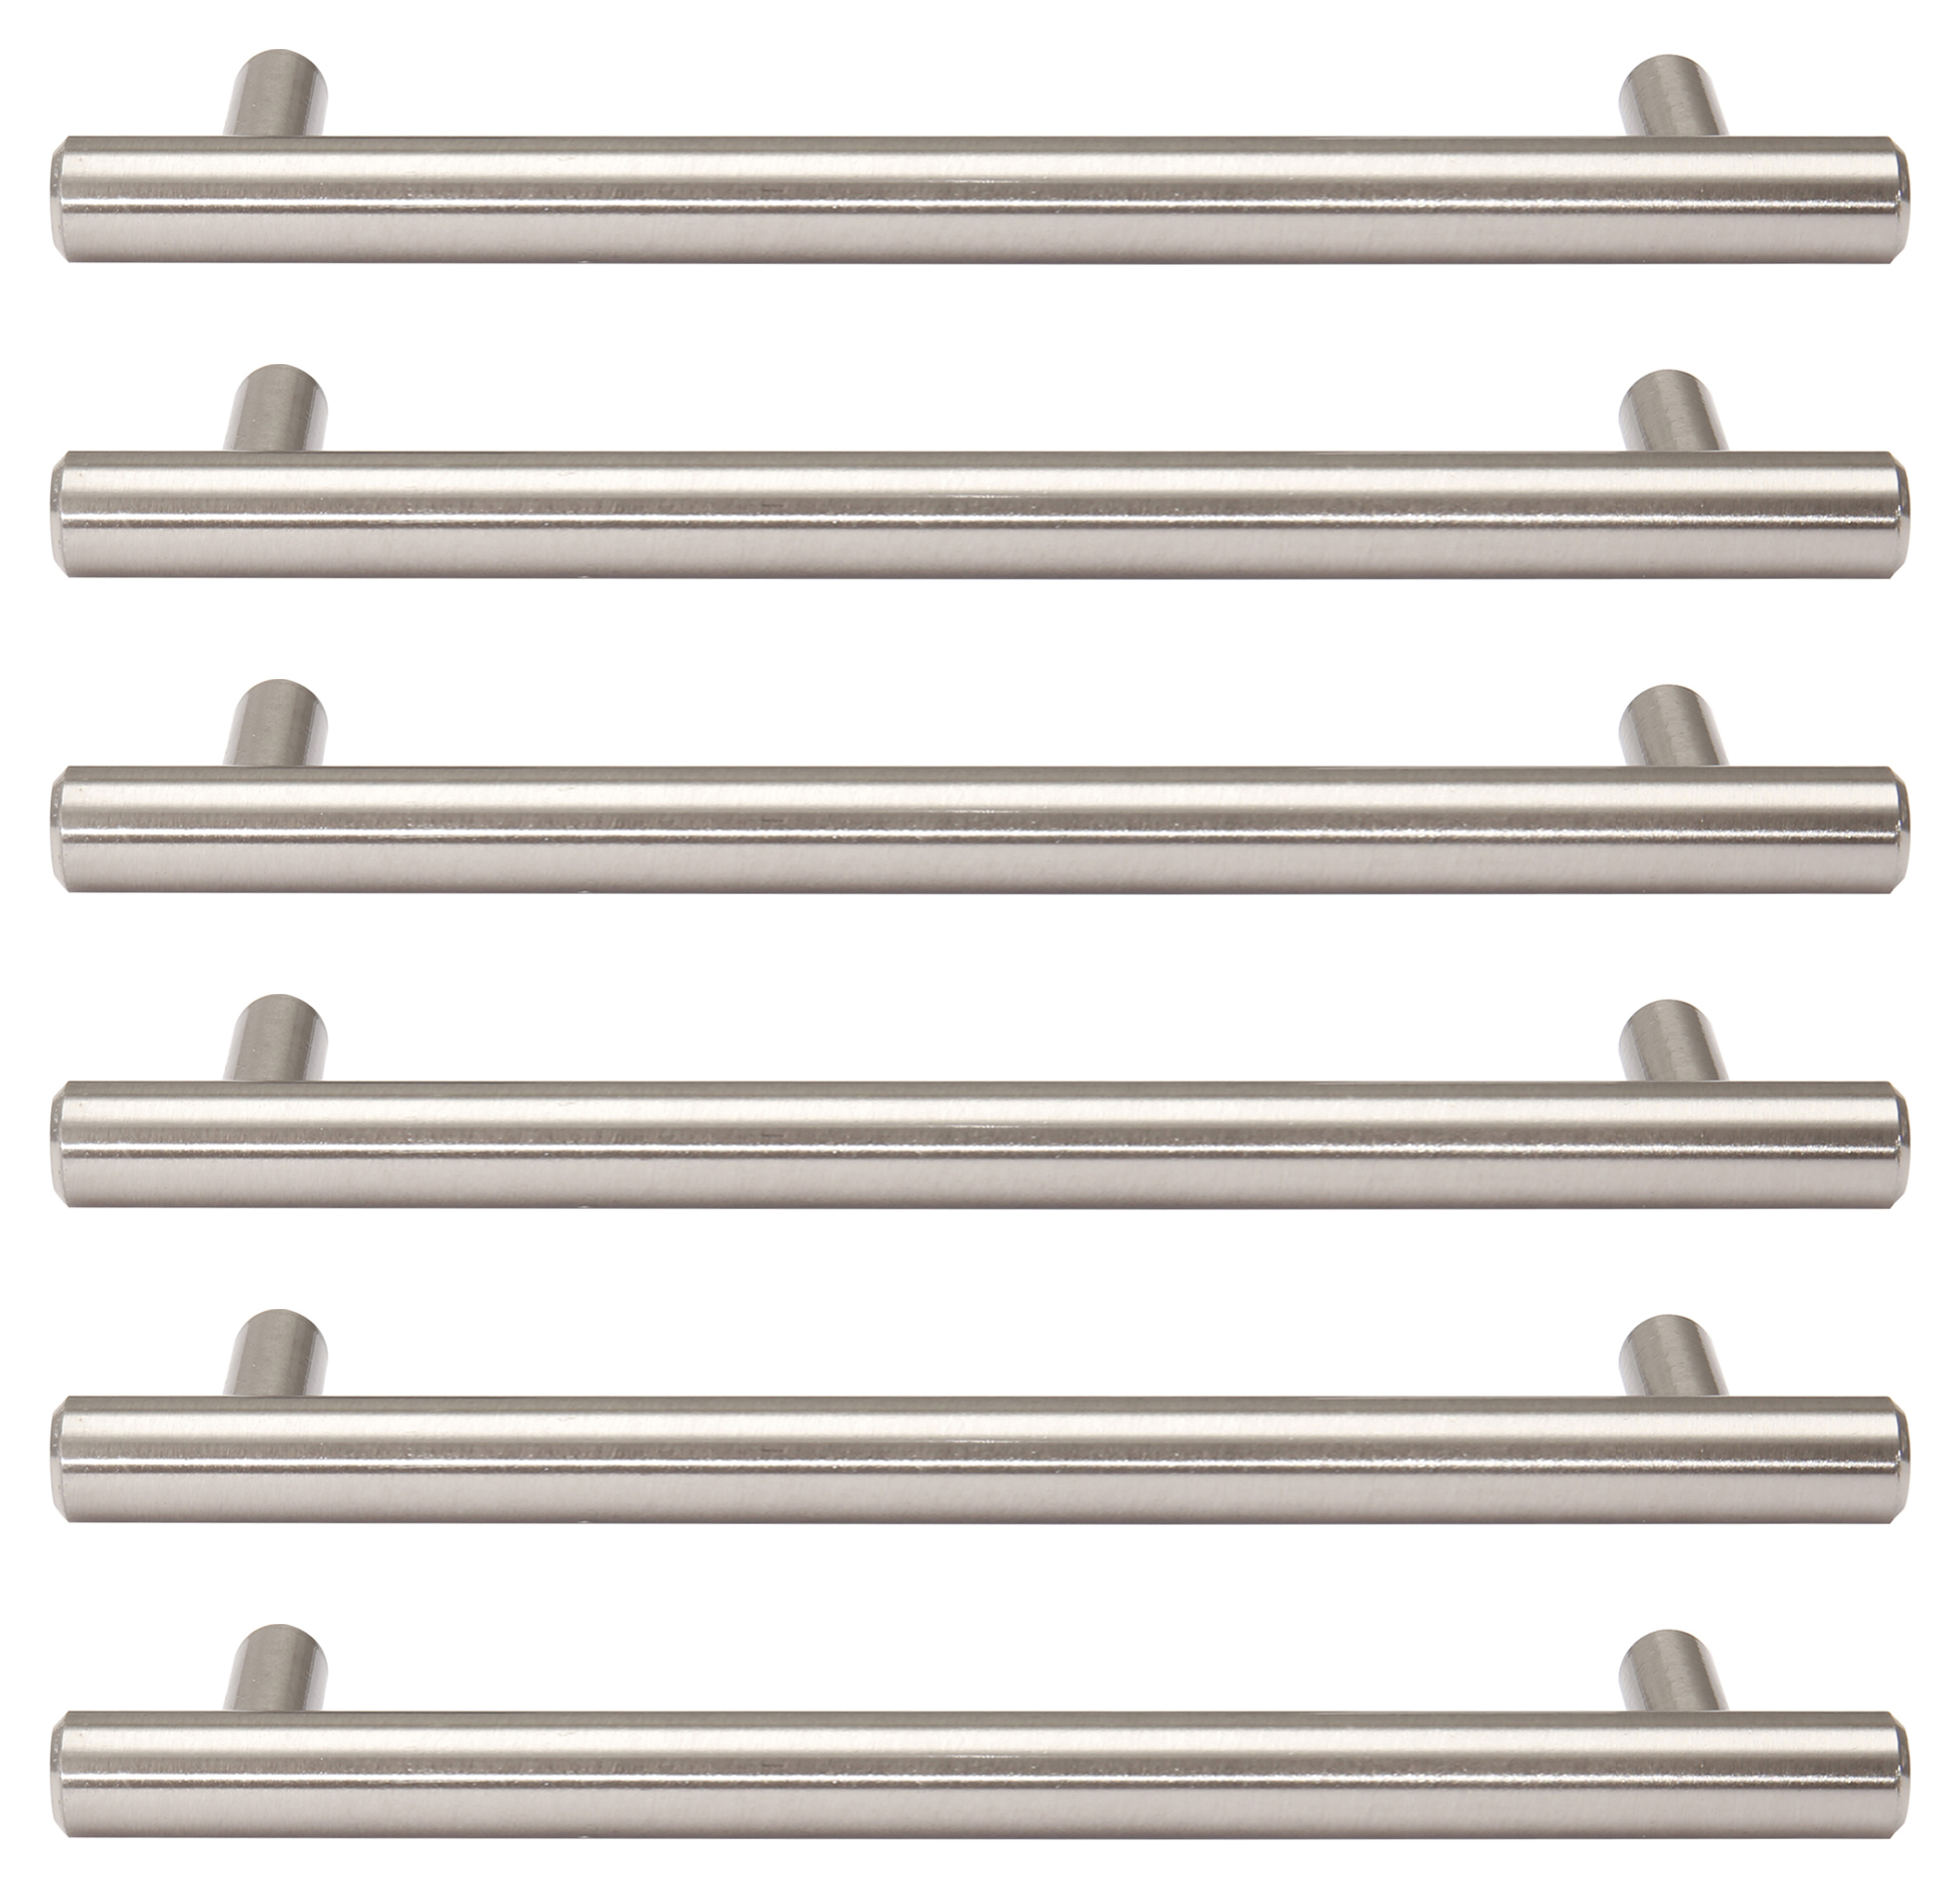 Solid Bar 3 in. (76 mm) Stainless Steel Cabinet Drawer Bar Pulls (4-Pack)